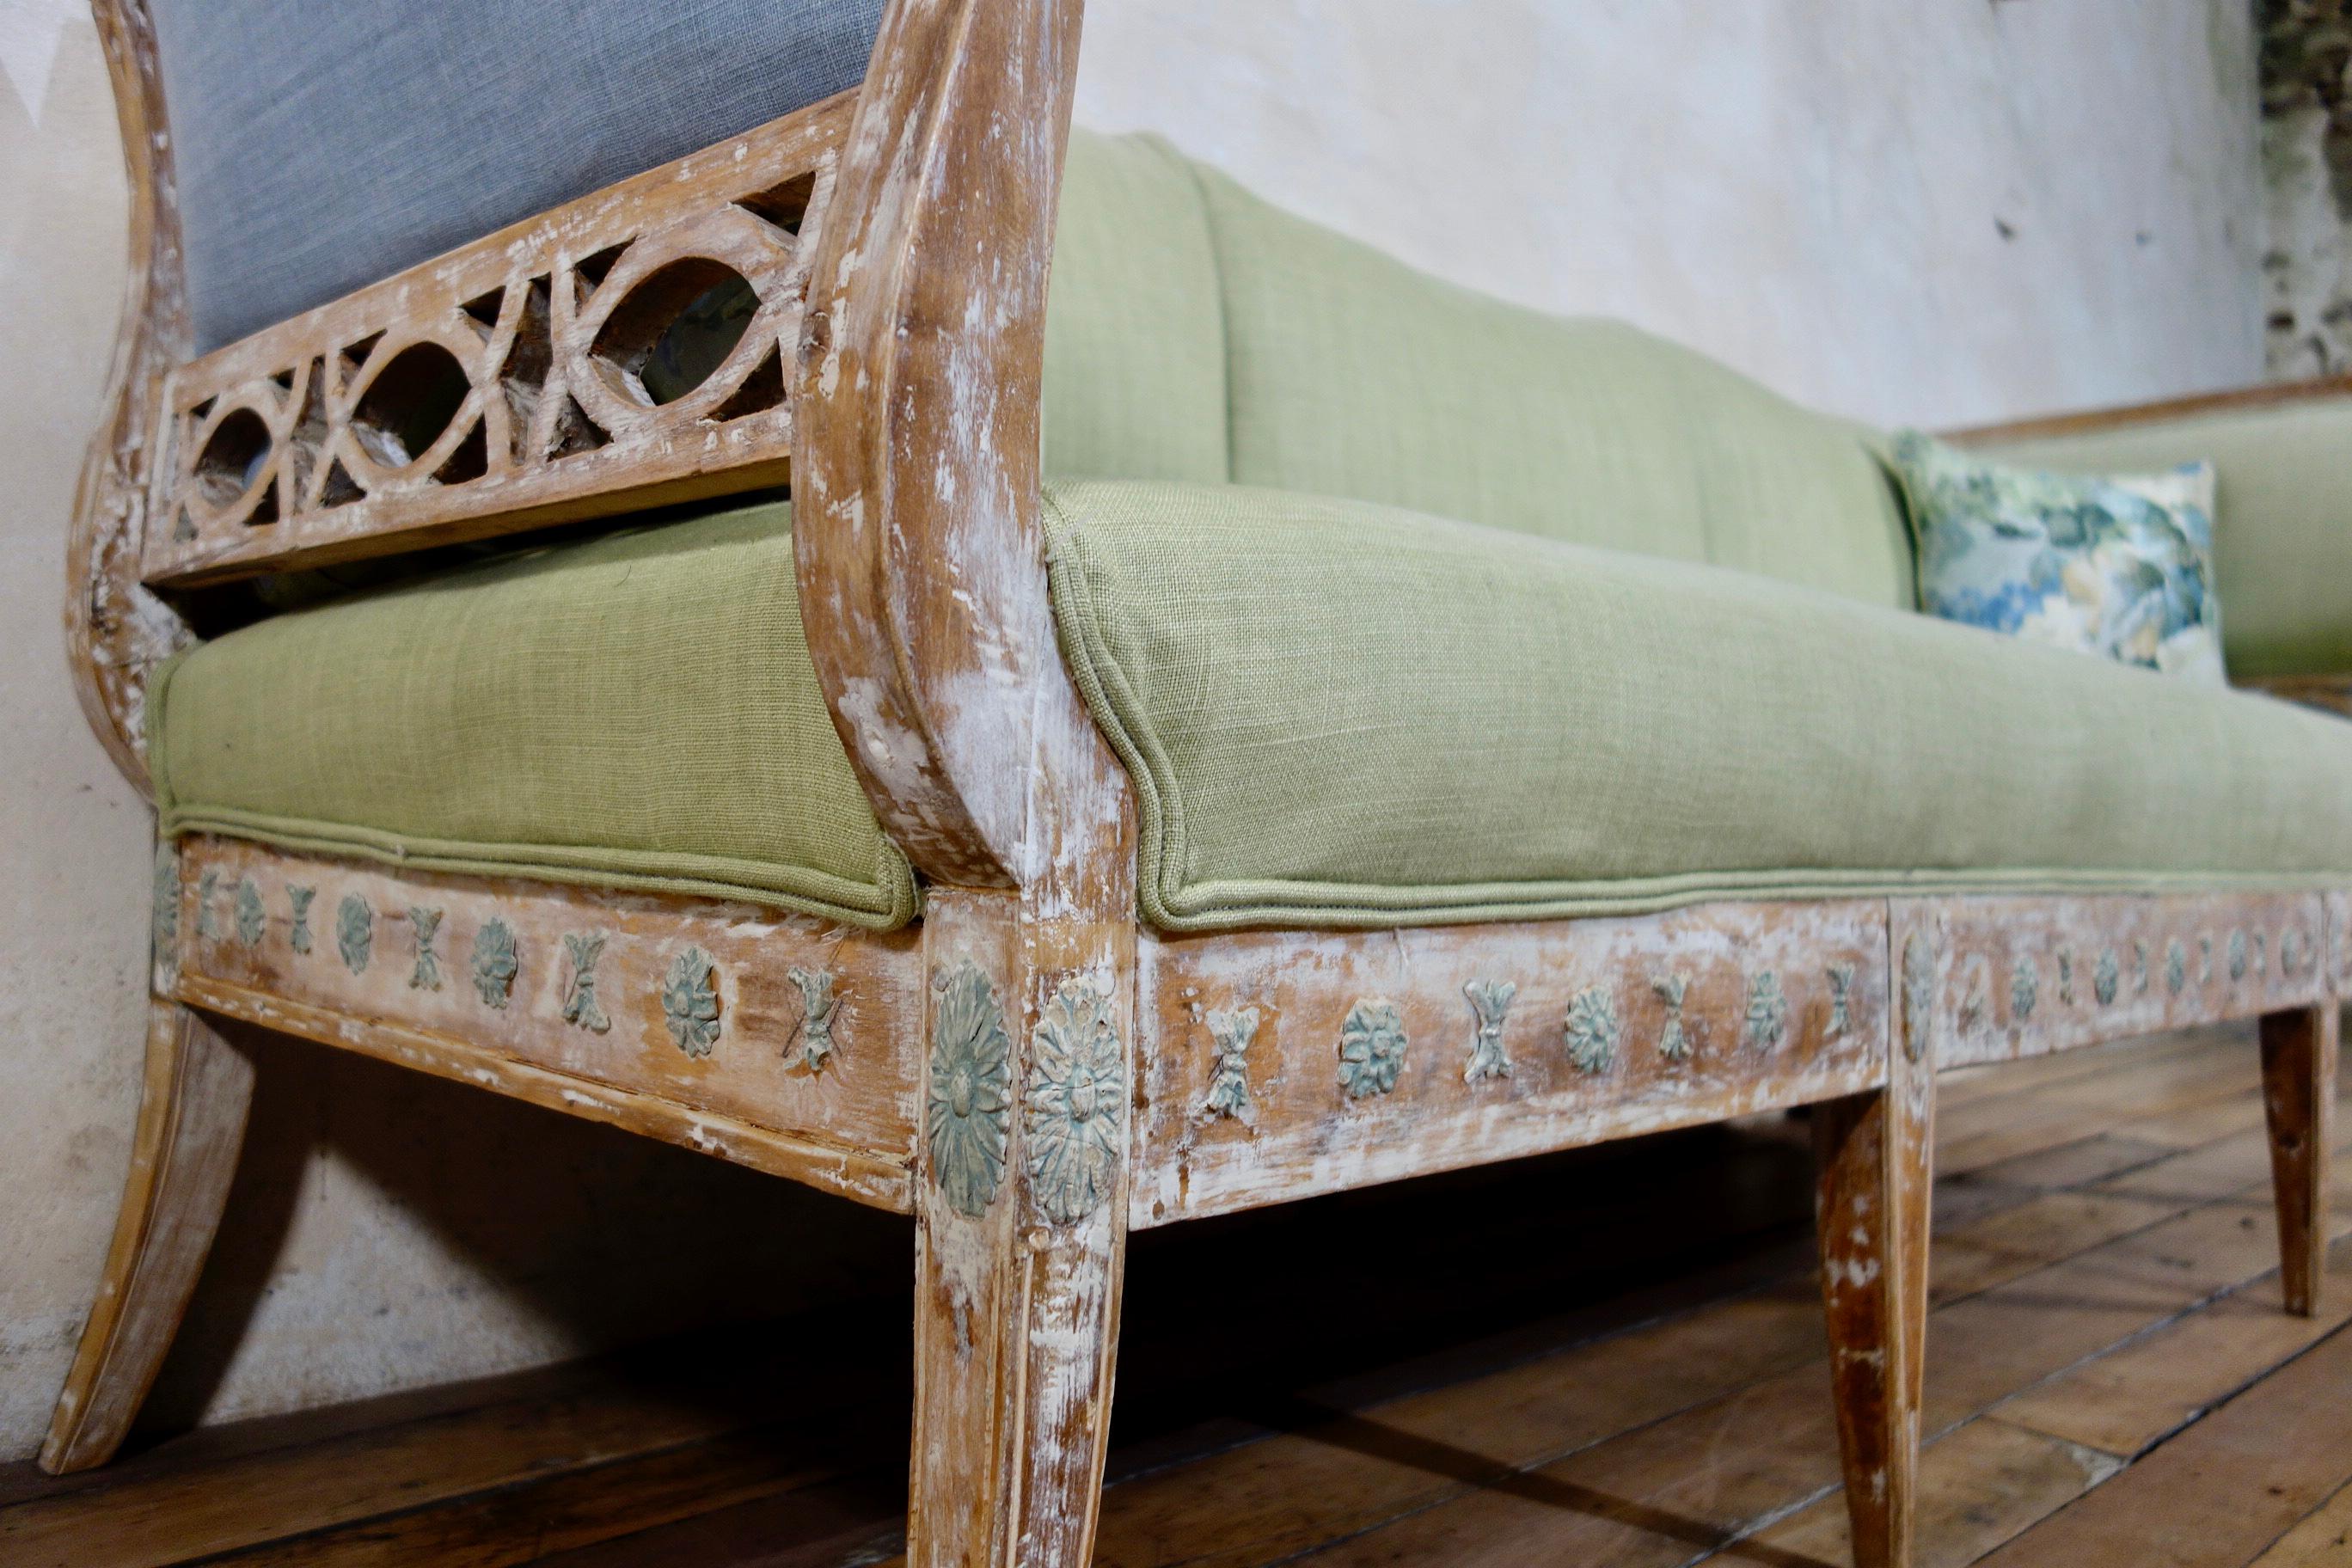 An elegant Swedish 18th century Gustavian sofa from Lindome, circa 1790. Displaying dry-scraped paint to reveal the original paint with green accents to the carved rosettes. Upholstered in green linen, finished with double piped detail.
Raised on